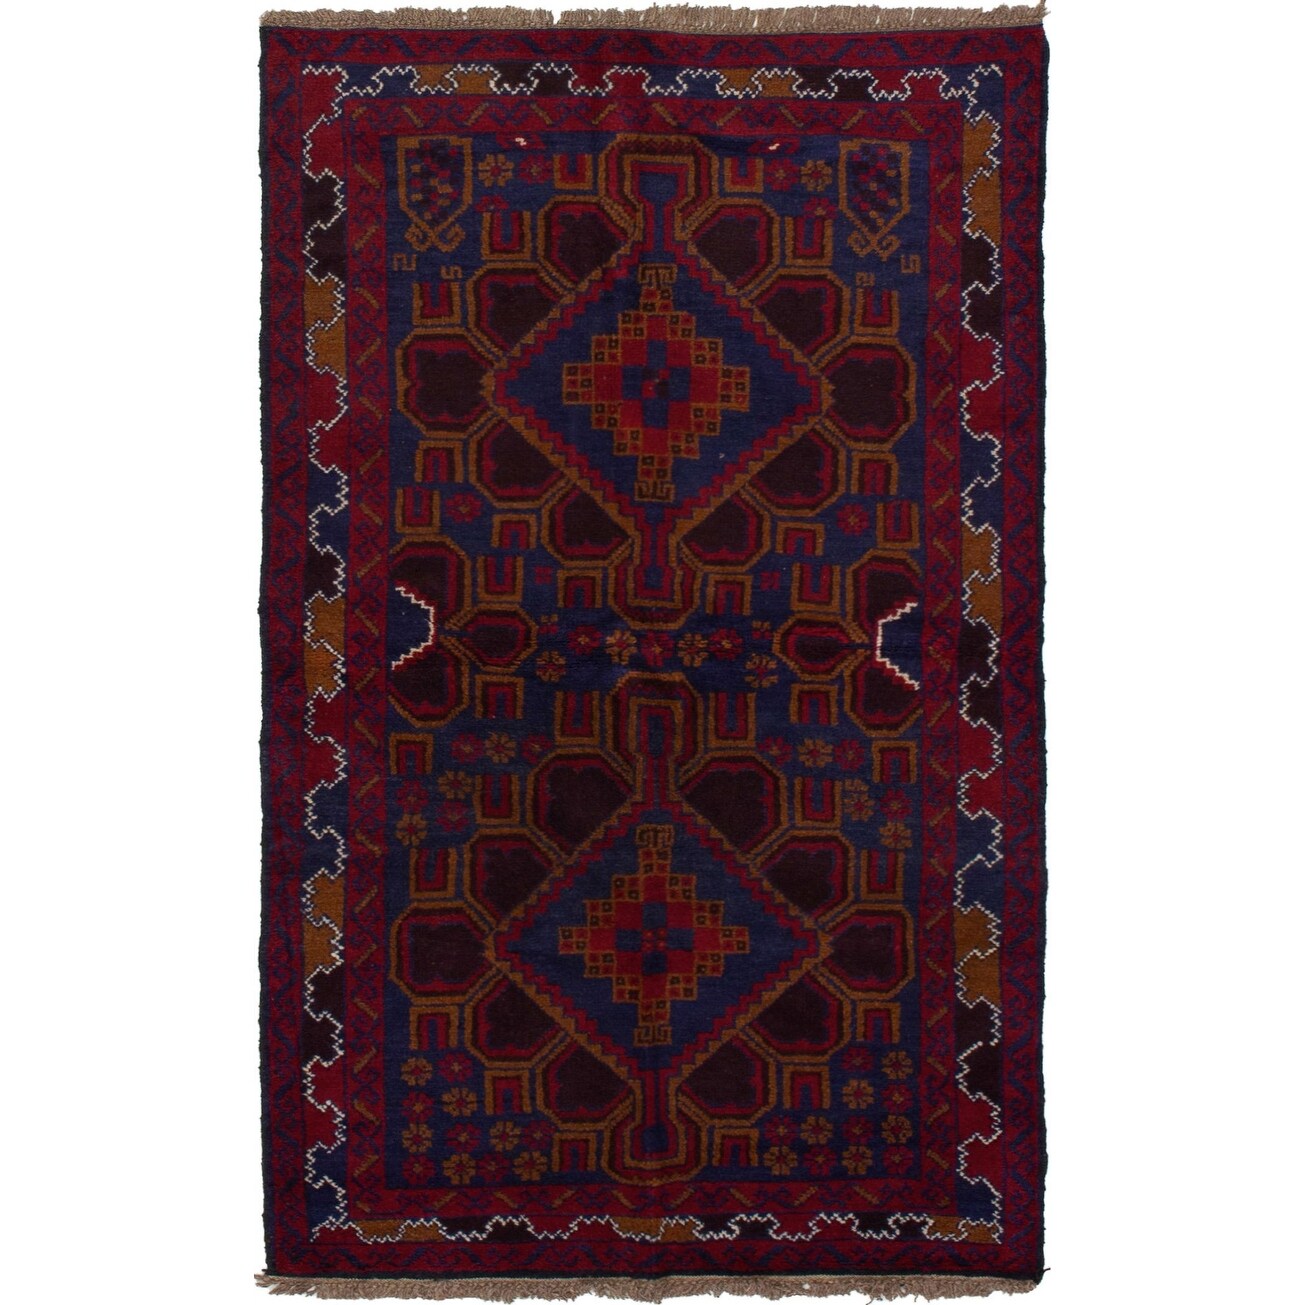 334795 eCarpet Gallery Area Rug for Living Room Bedroom Hand-Knotted Wool Rug Rizbaft Bordered Brown Rug 3'6 x 6'4 